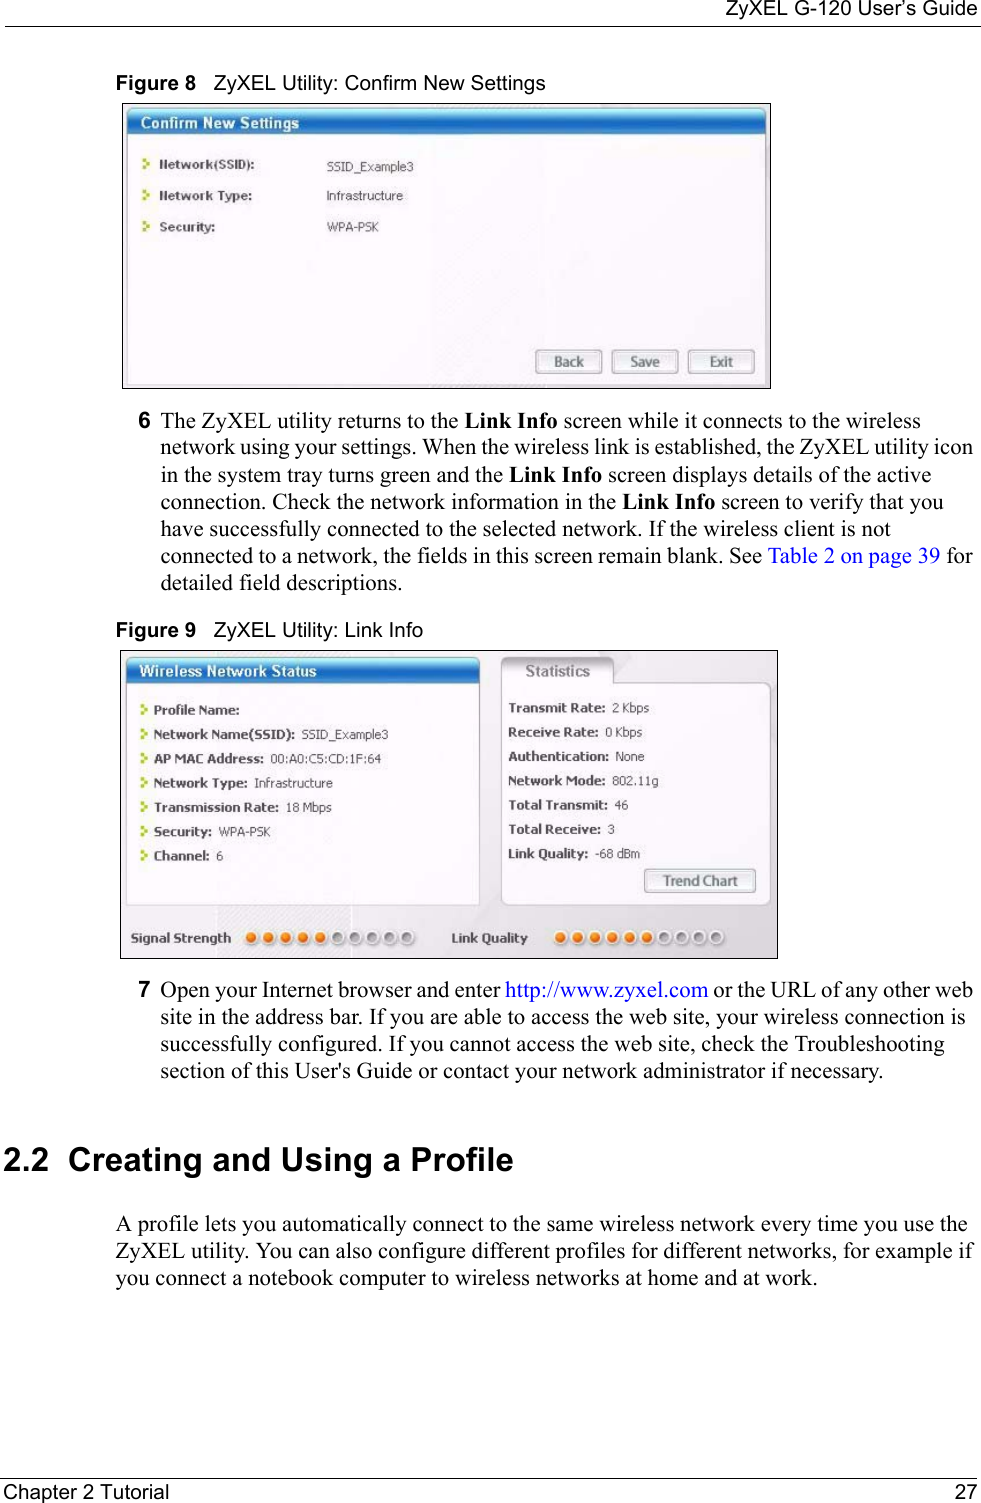 ZyXEL G-120 User’s GuideChapter 2 Tutorial 27Figure 8   ZyXEL Utility: Confirm New Settings 6The ZyXEL utility returns to the Link Info screen while it connects to the wireless network using your settings. When the wireless link is established, the ZyXEL utility icon in the system tray turns green and the Link Info screen displays details of the active connection. Check the network information in the Link Info screen to verify that you have successfully connected to the selected network. If the wireless client is not connected to a network, the fields in this screen remain blank. See Table 2 on page 39 for detailed field descriptions.Figure 9   ZyXEL Utility: Link Info 7Open your Internet browser and enter http://www.zyxel.com or the URL of any other web site in the address bar. If you are able to access the web site, your wireless connection is successfully configured. If you cannot access the web site, check the Troubleshooting section of this User&apos;s Guide or contact your network administrator if necessary.2.2  Creating and Using a ProfileA profile lets you automatically connect to the same wireless network every time you use the ZyXEL utility. You can also configure different profiles for different networks, for example if you connect a notebook computer to wireless networks at home and at work.